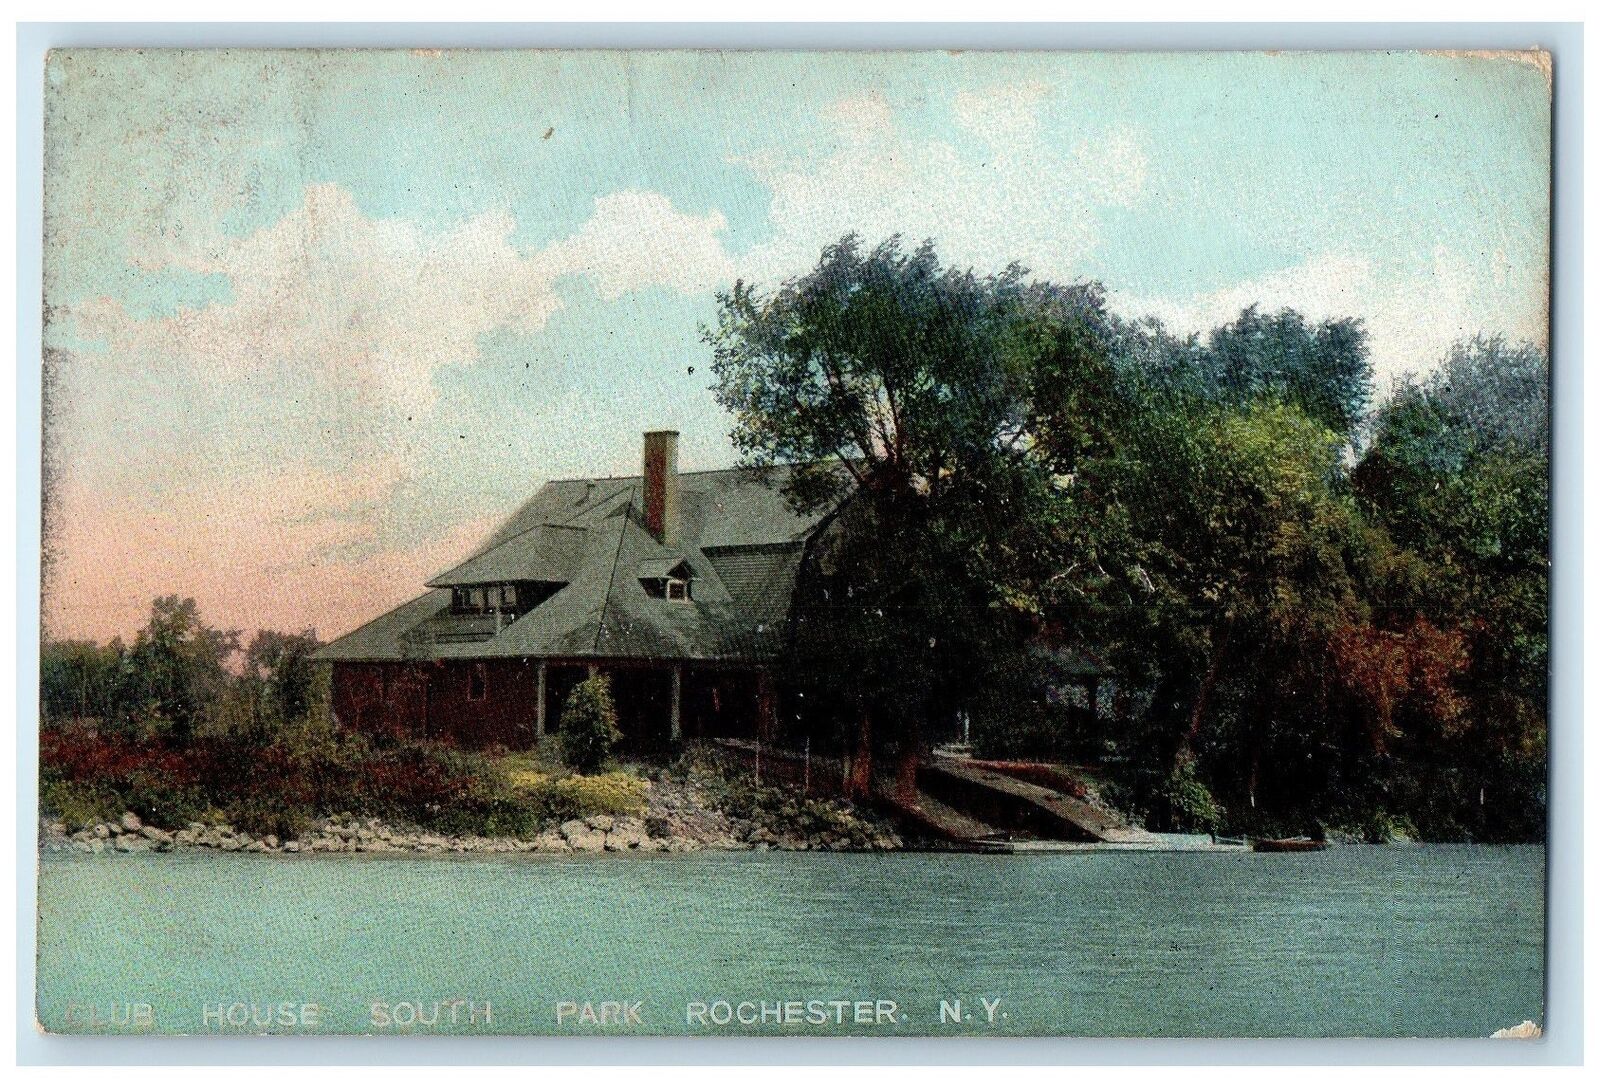 1908 House South Park Boats Trees Scene Rochester New York NY Posted Postcard